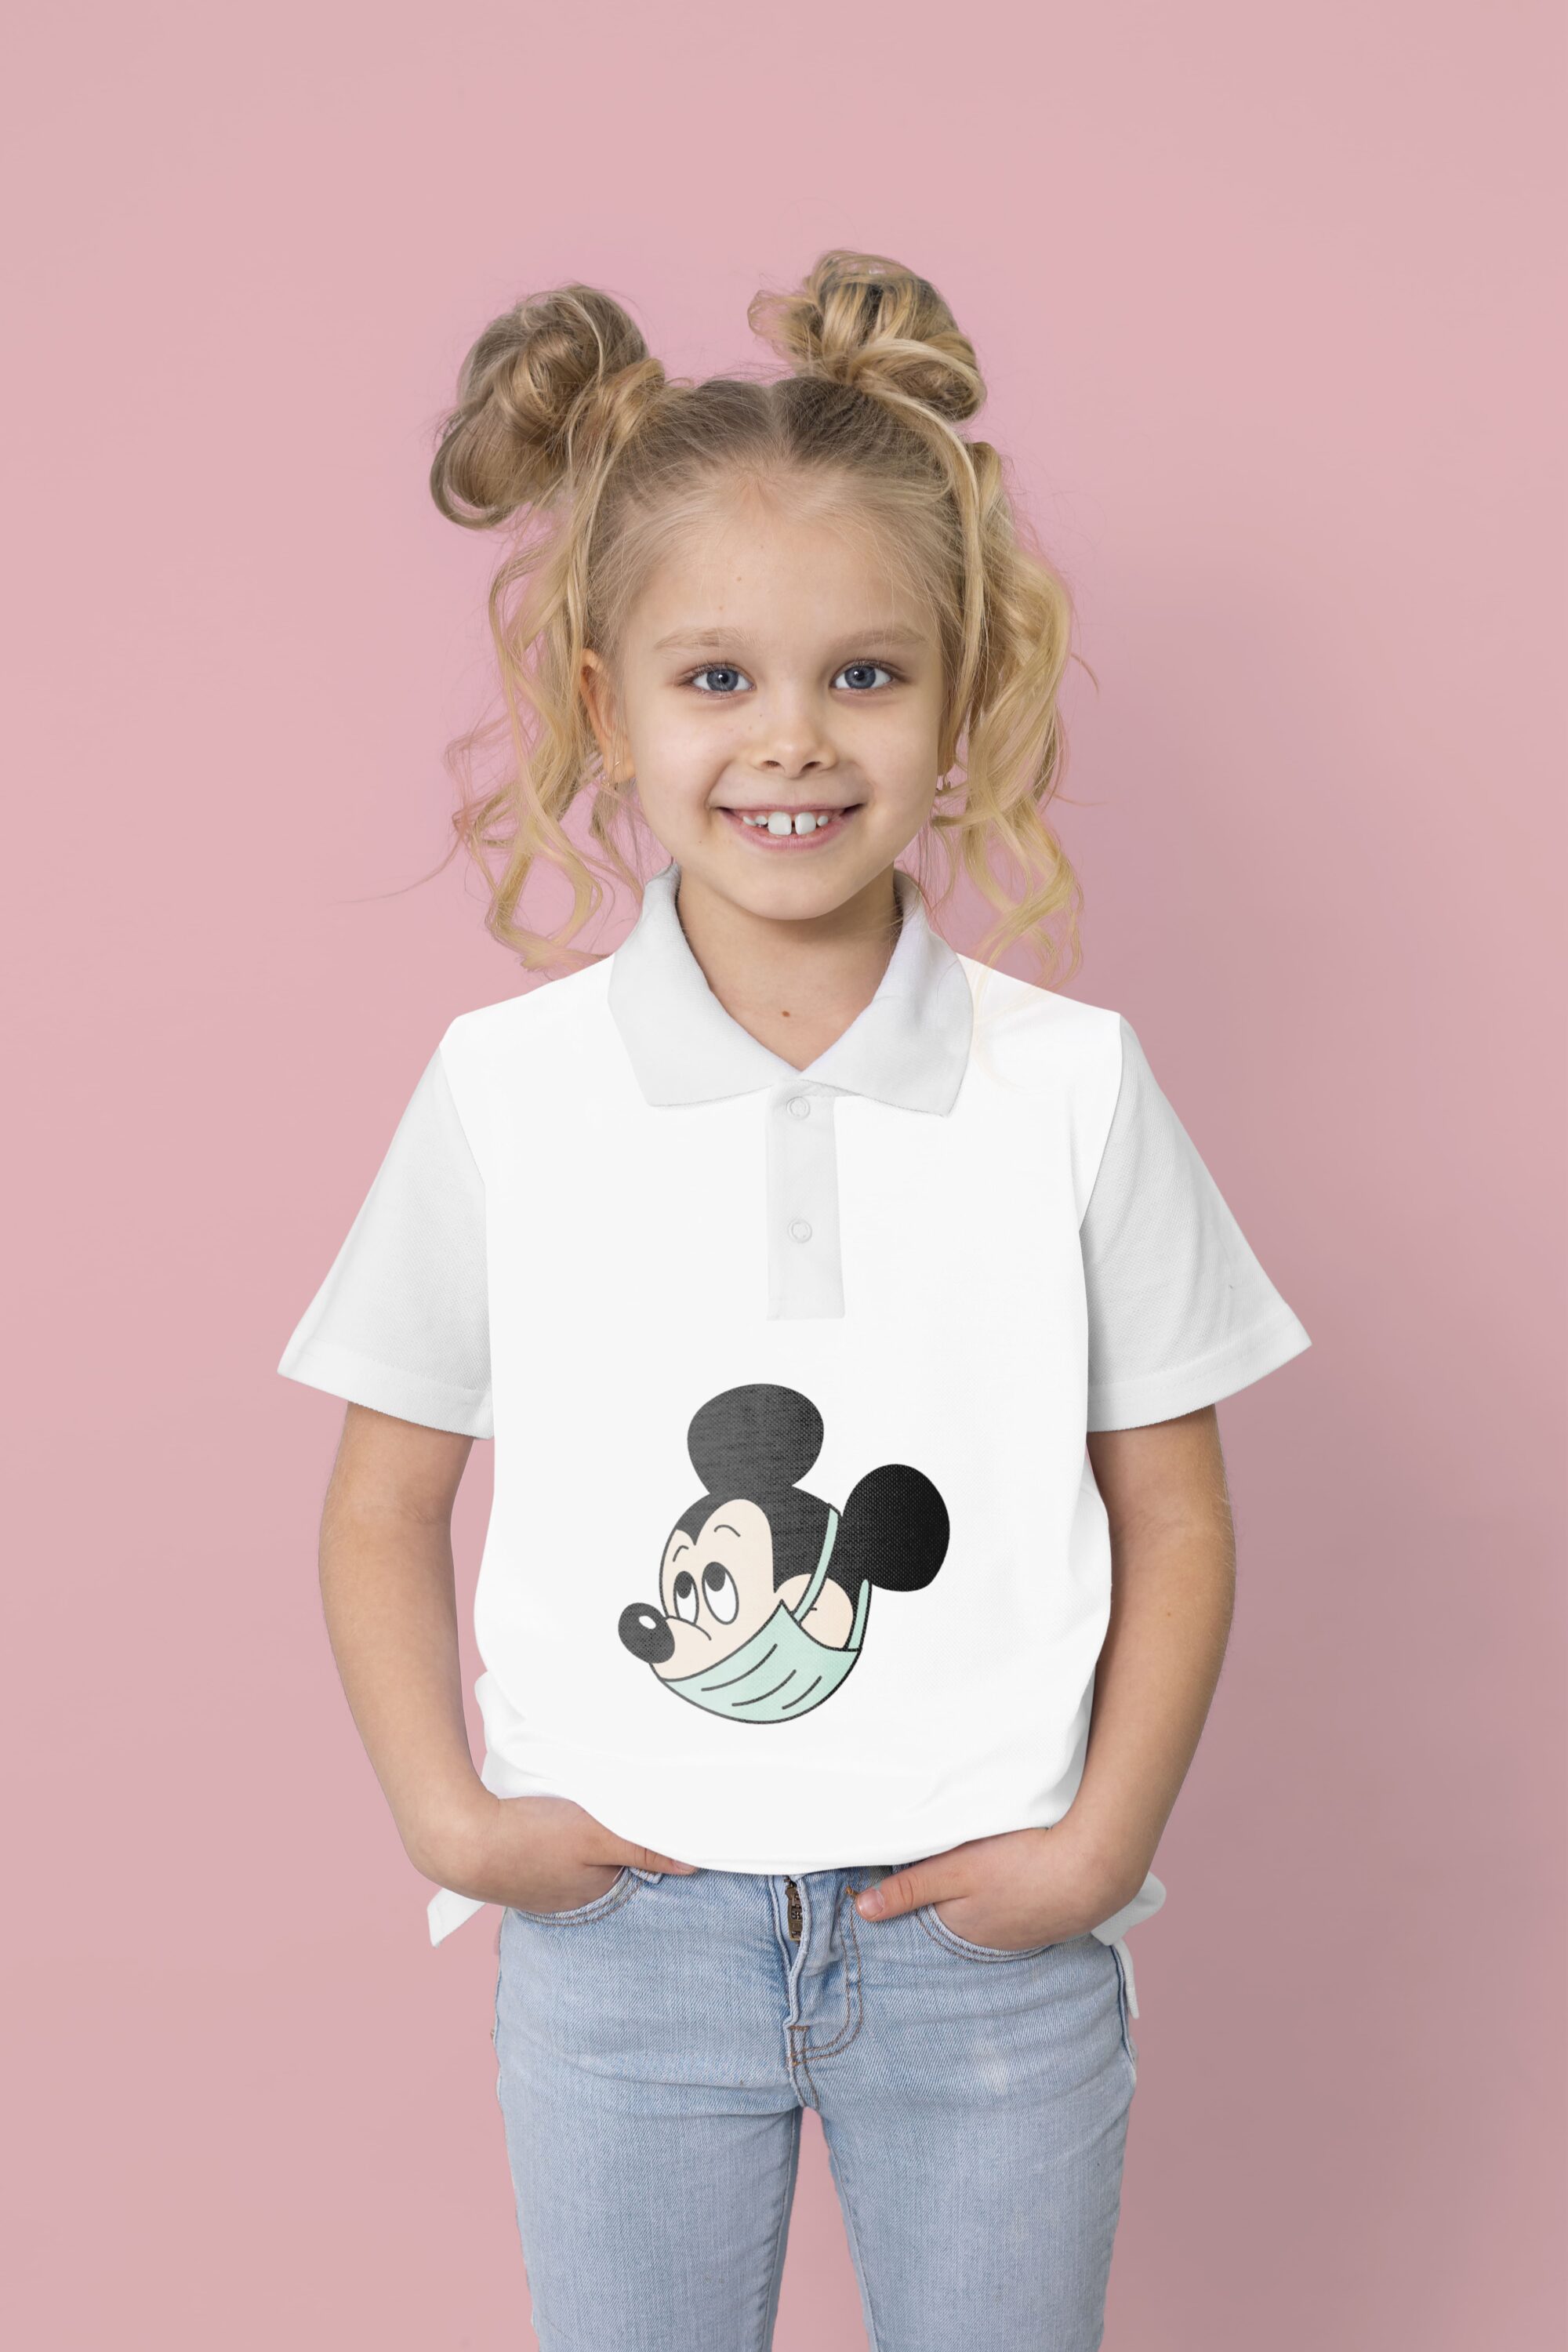 Mickey mouse face with mask on a white t-shirt.